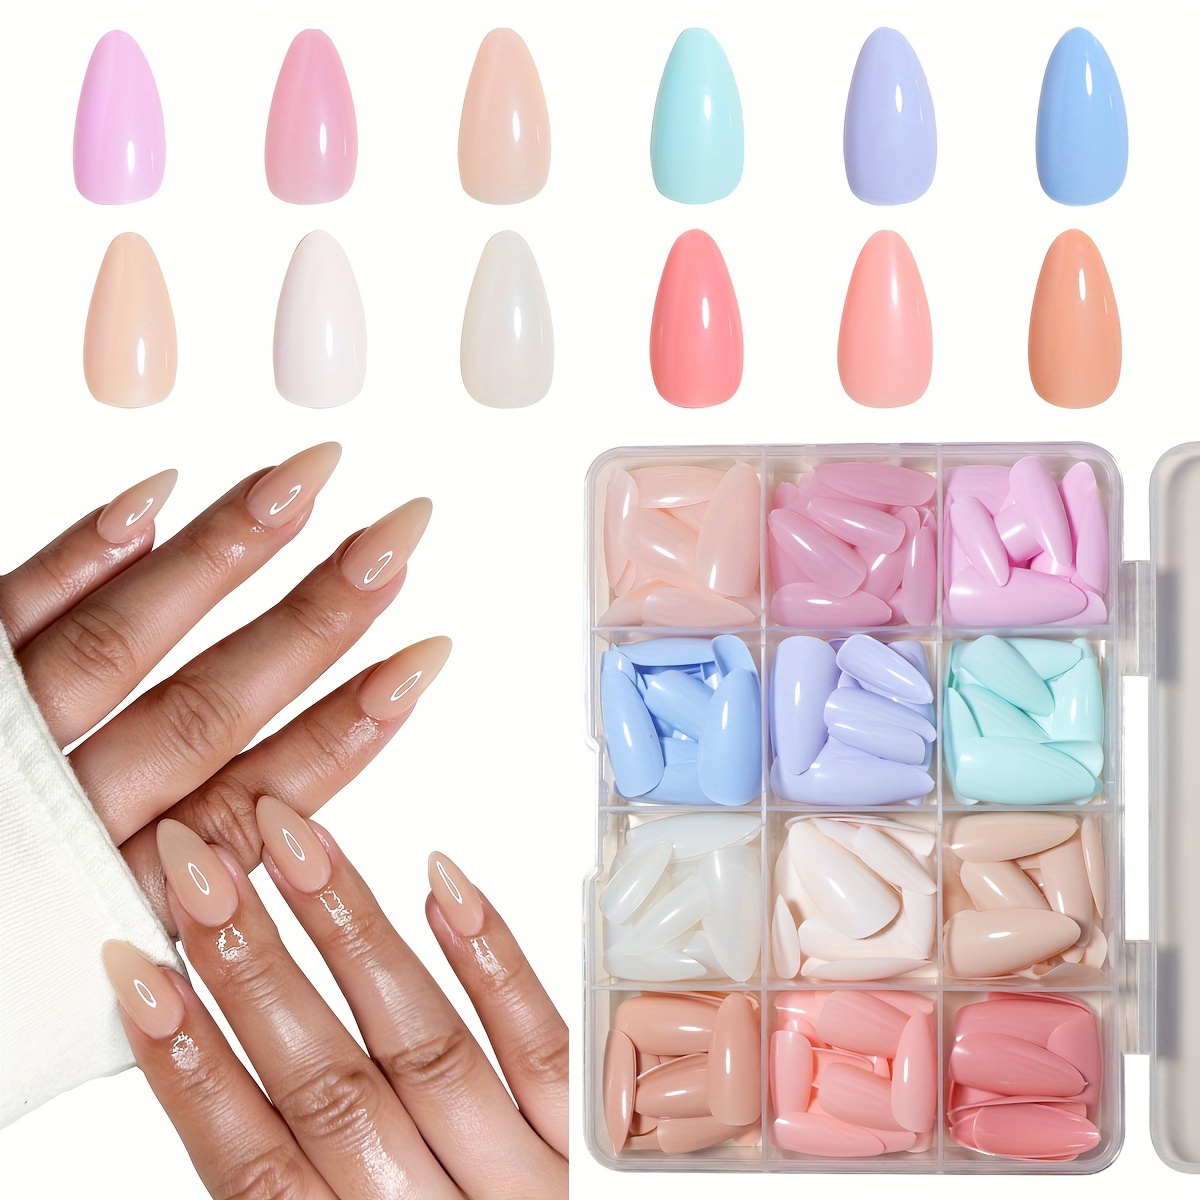 

500 Pieces Almond Shape False Nails Set, Spring Warm Color Series, Full Cover Artificial Nail Tips With Assorted Sizes In 12-grid Organizer Box, Diy Manicure Salon-style Fake Nails For Nail Art Design